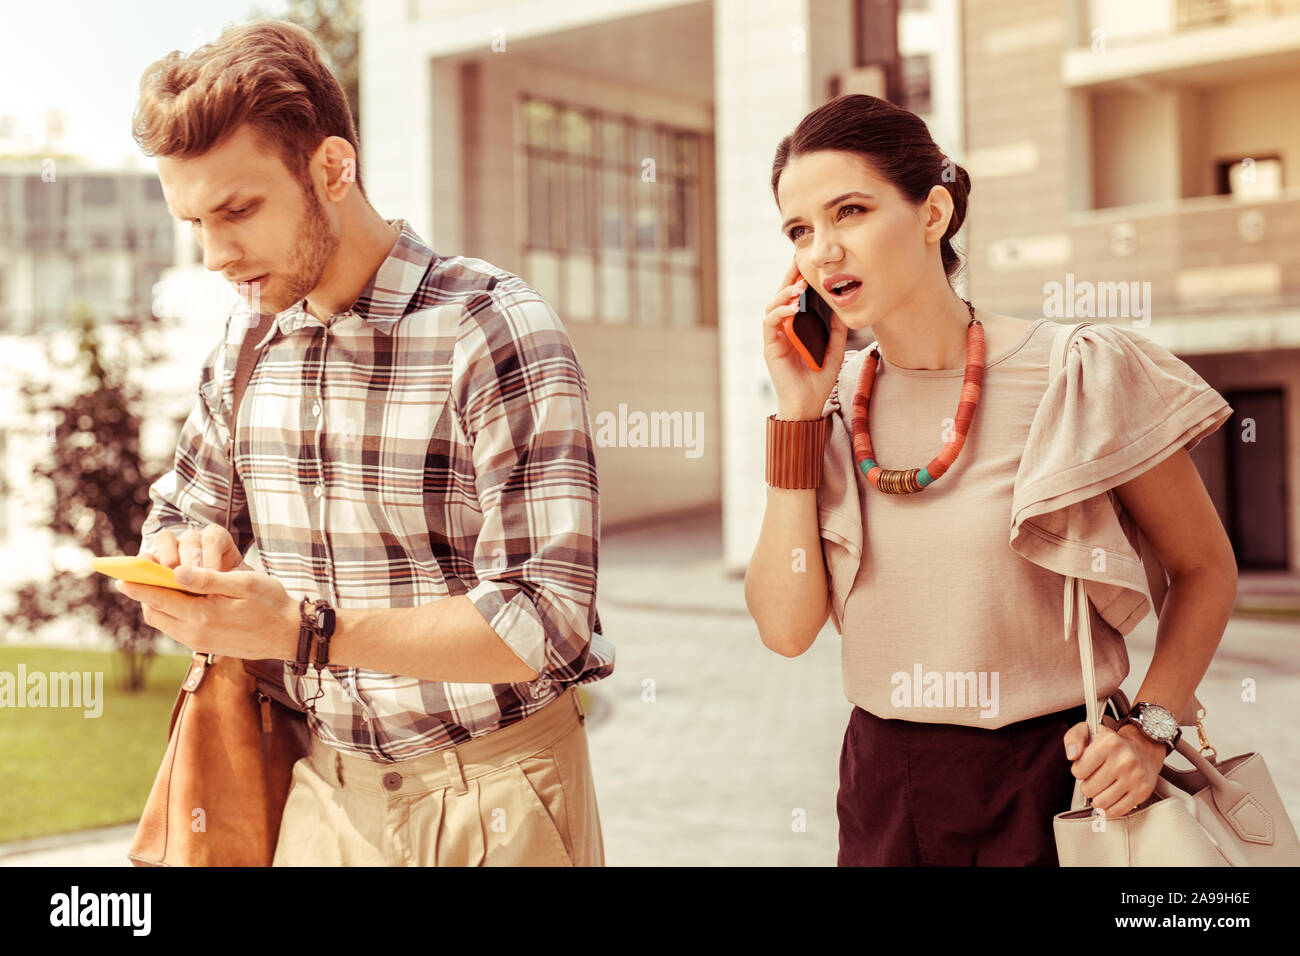 Emotional young female person talking per telephone Stock Photo